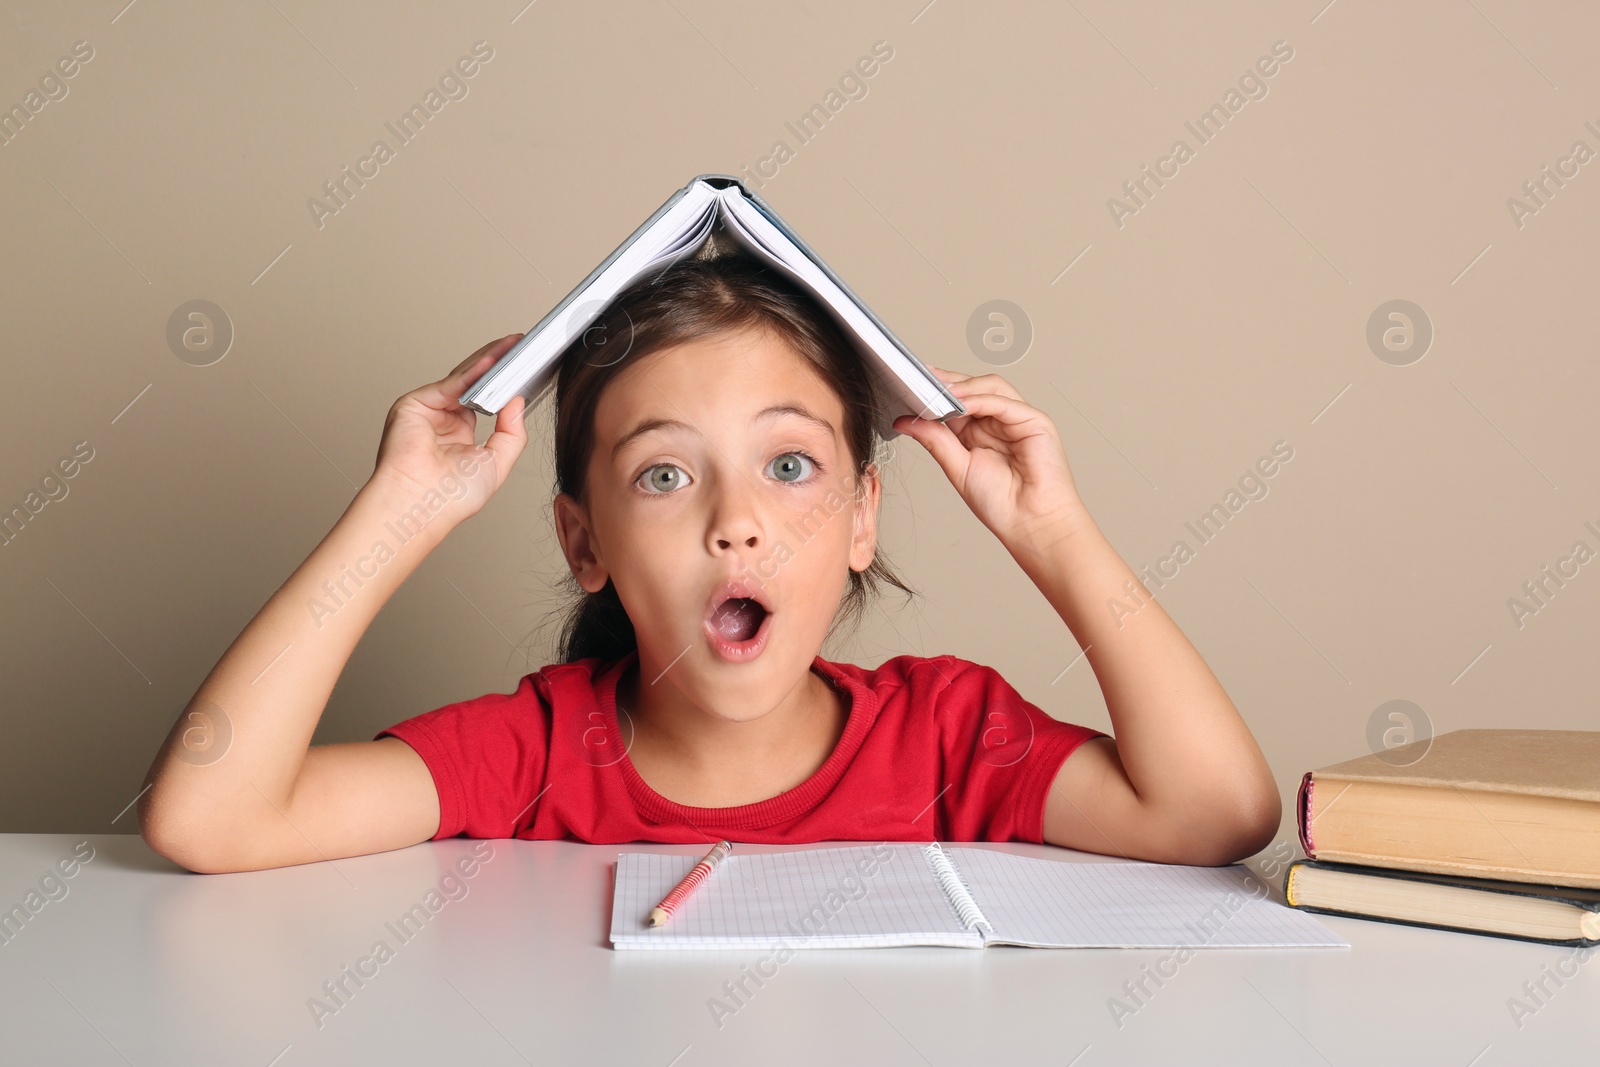 Photo of Emotional little girl with book on her head doing homework at table against beige background